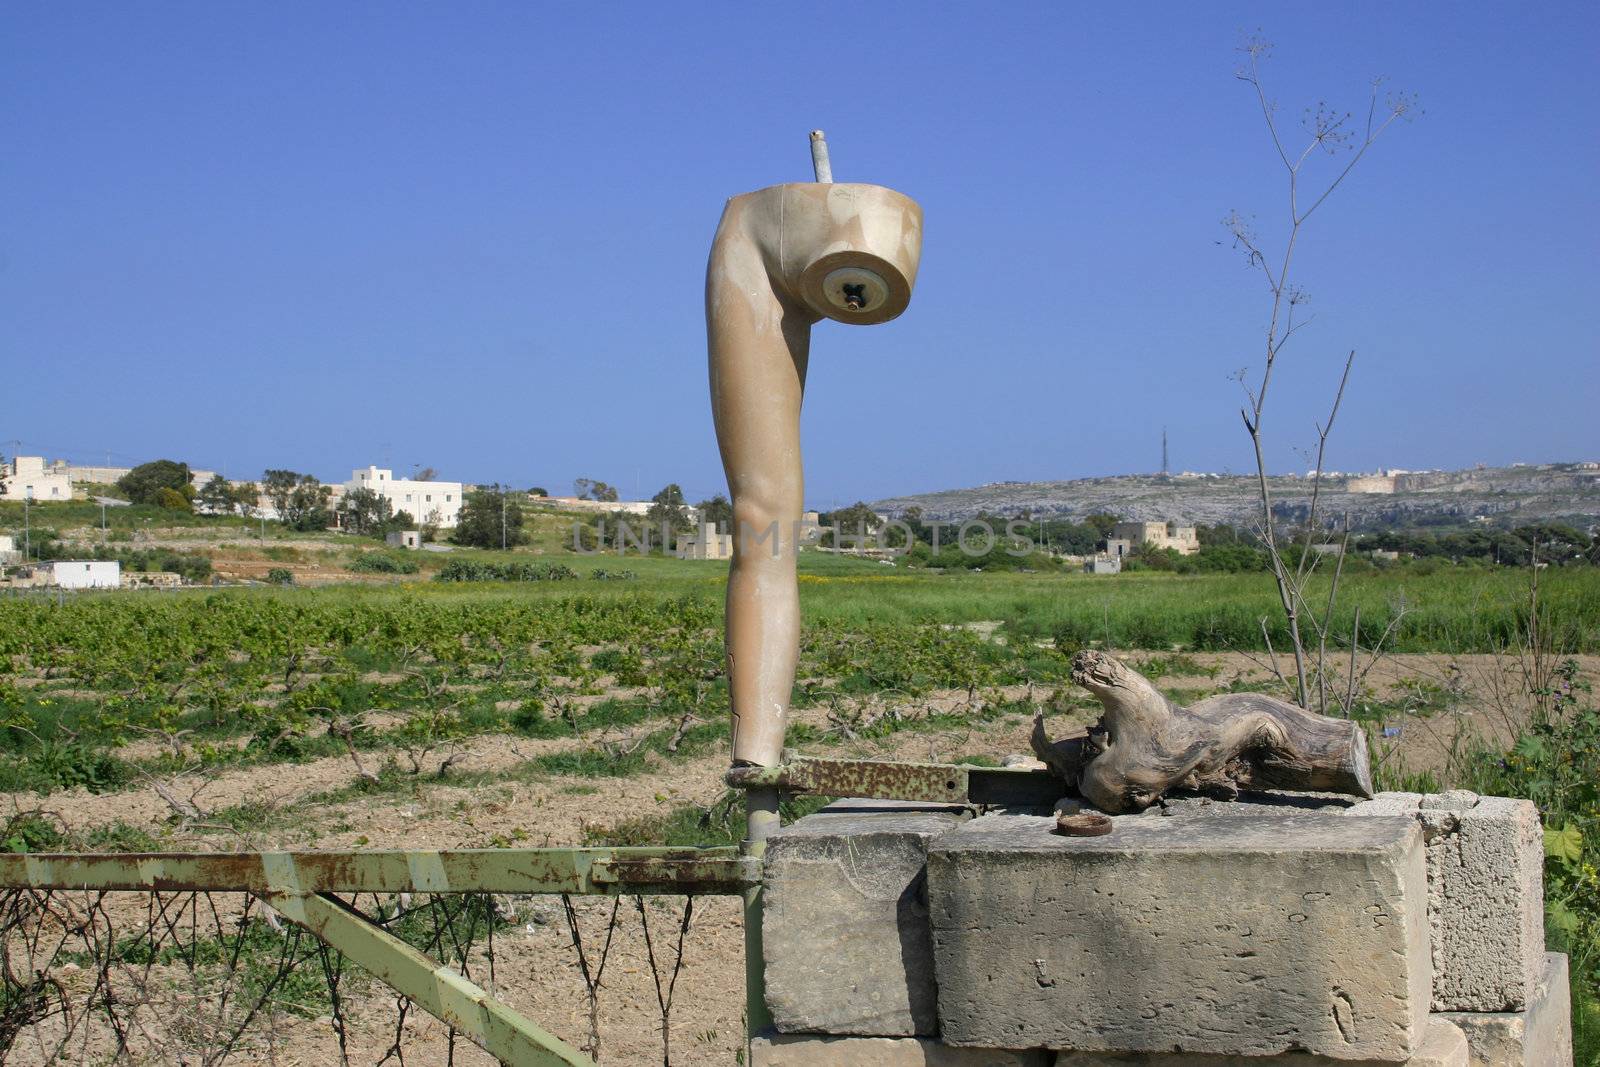 A part of an old mannequin is used as a gatepost in Malta